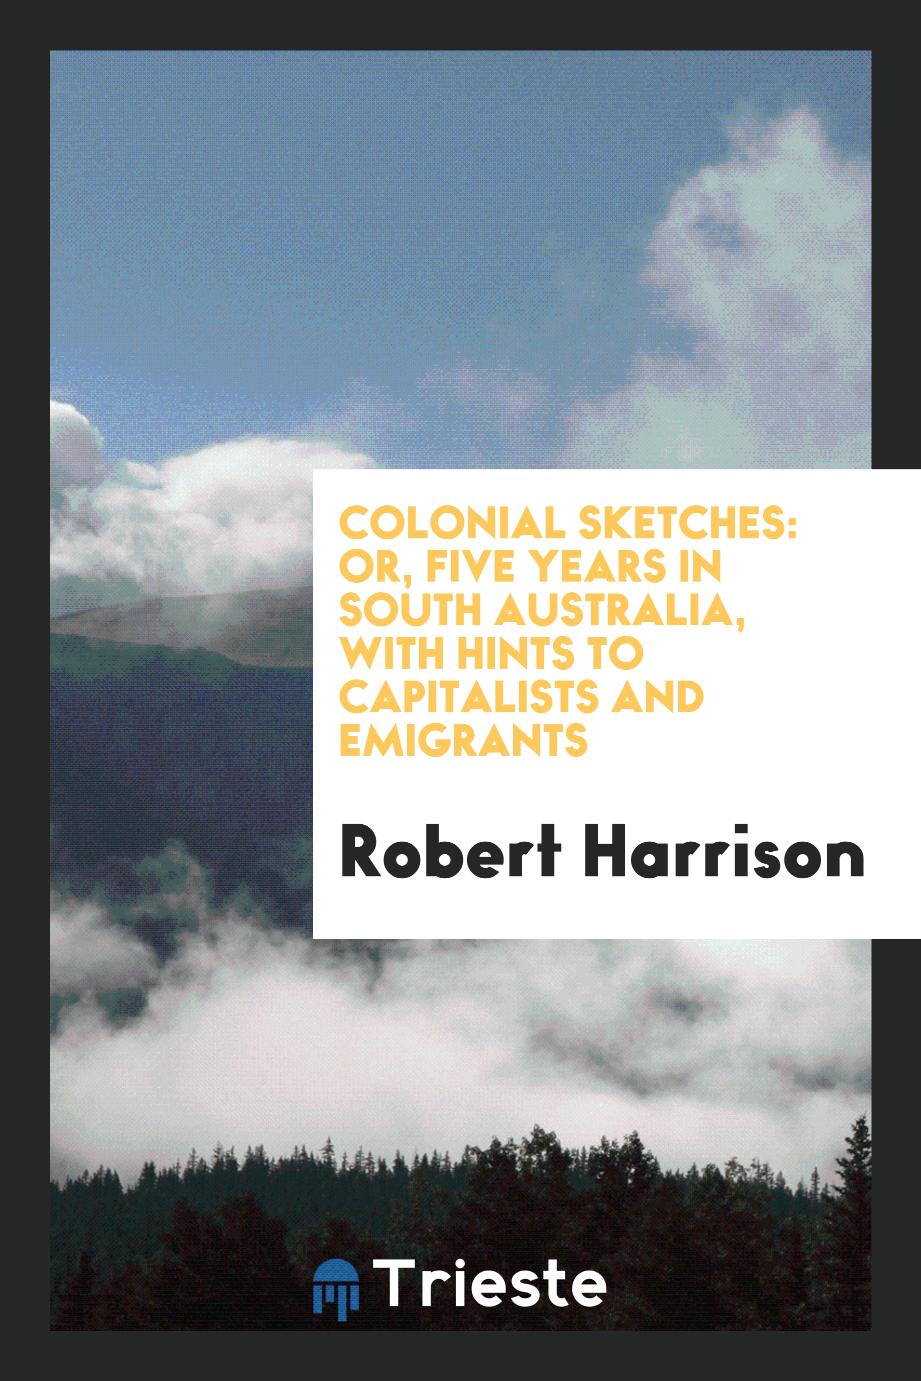 Colonial Sketches: Or, Five Years in South Australia, with Hints to Capitalists and Emigrants